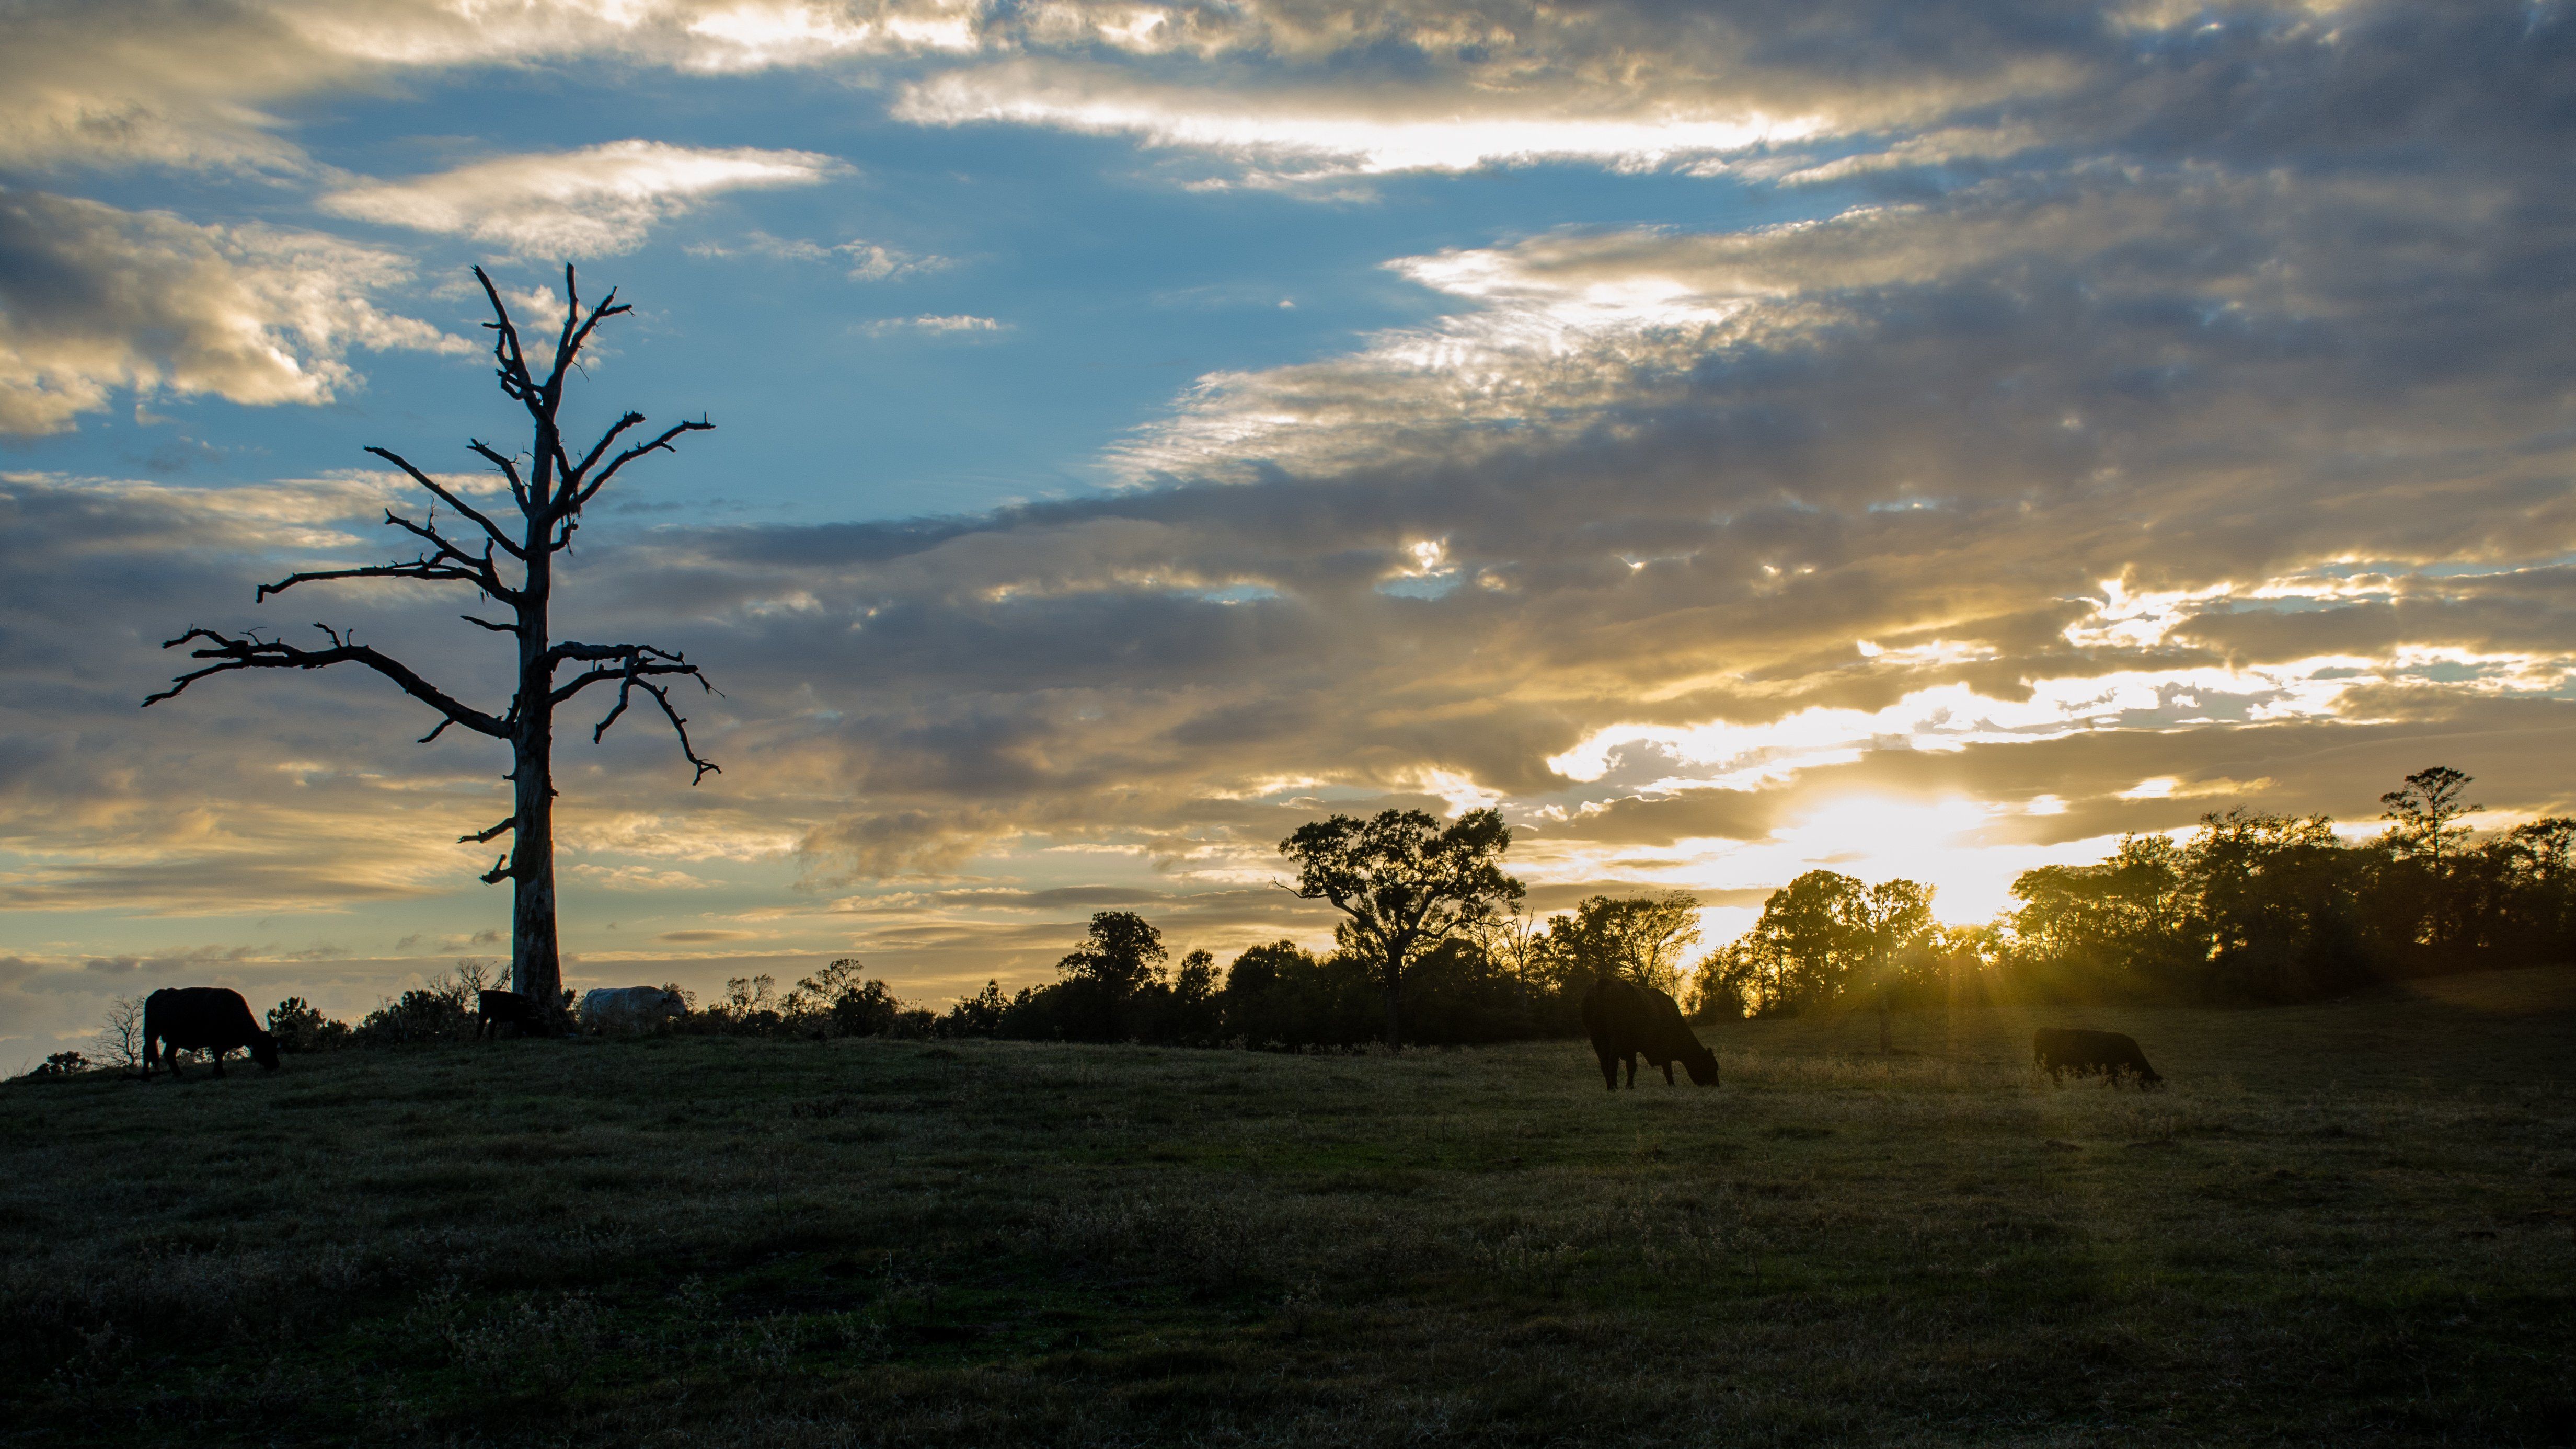 A field with cows and a dead tree at sunset. - Texas